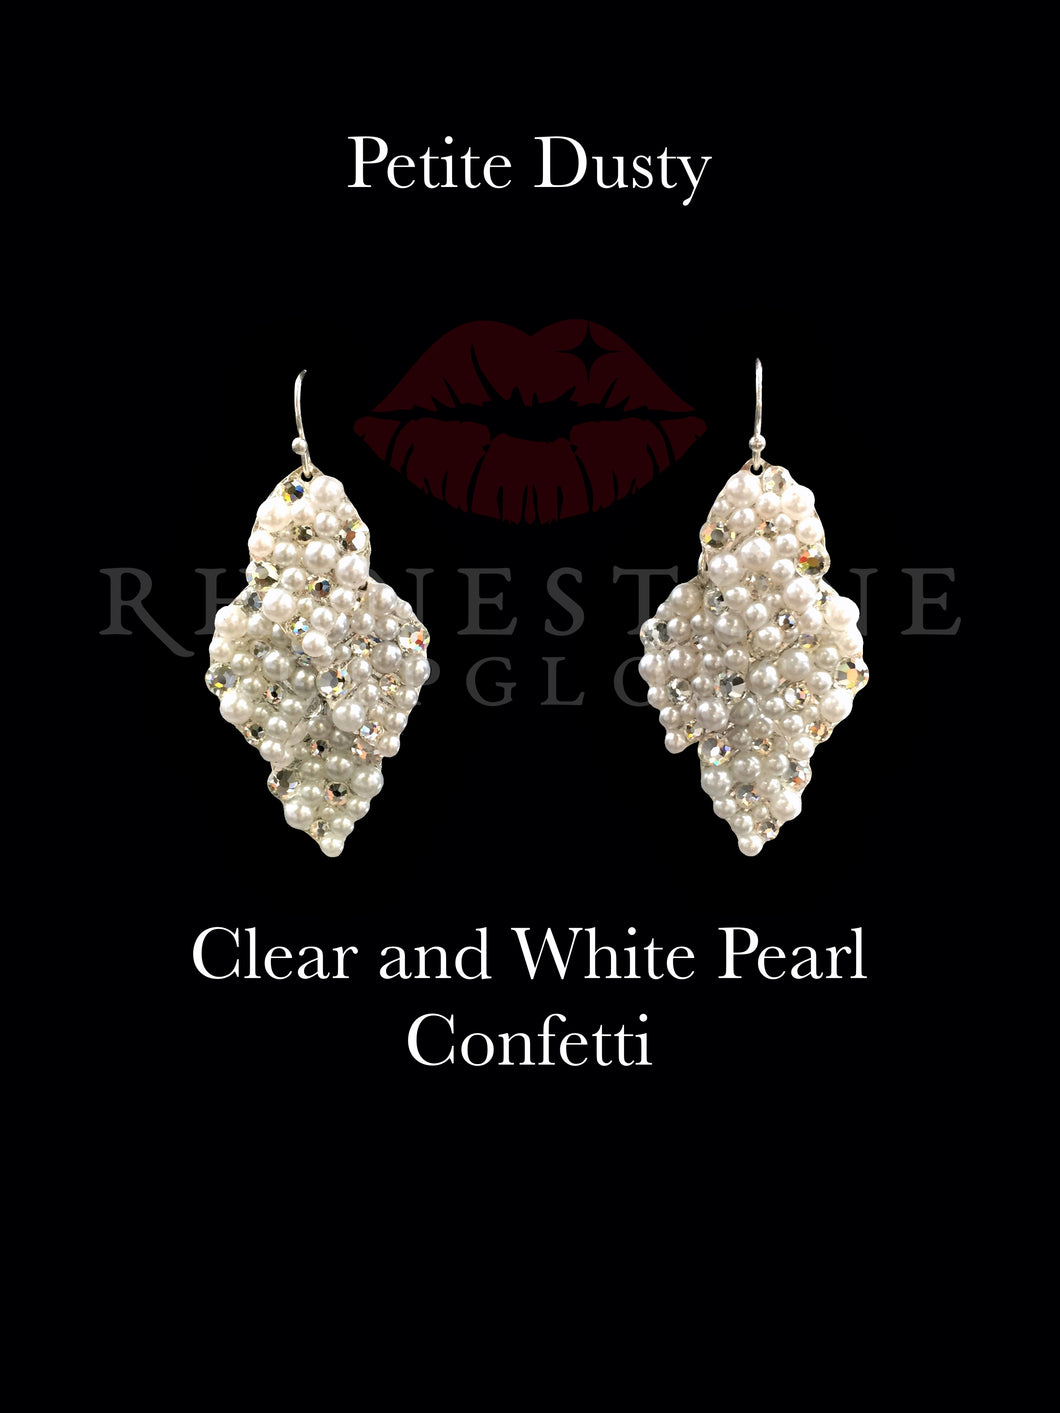 Petite Dusty Confetti - White Pearl and Clear